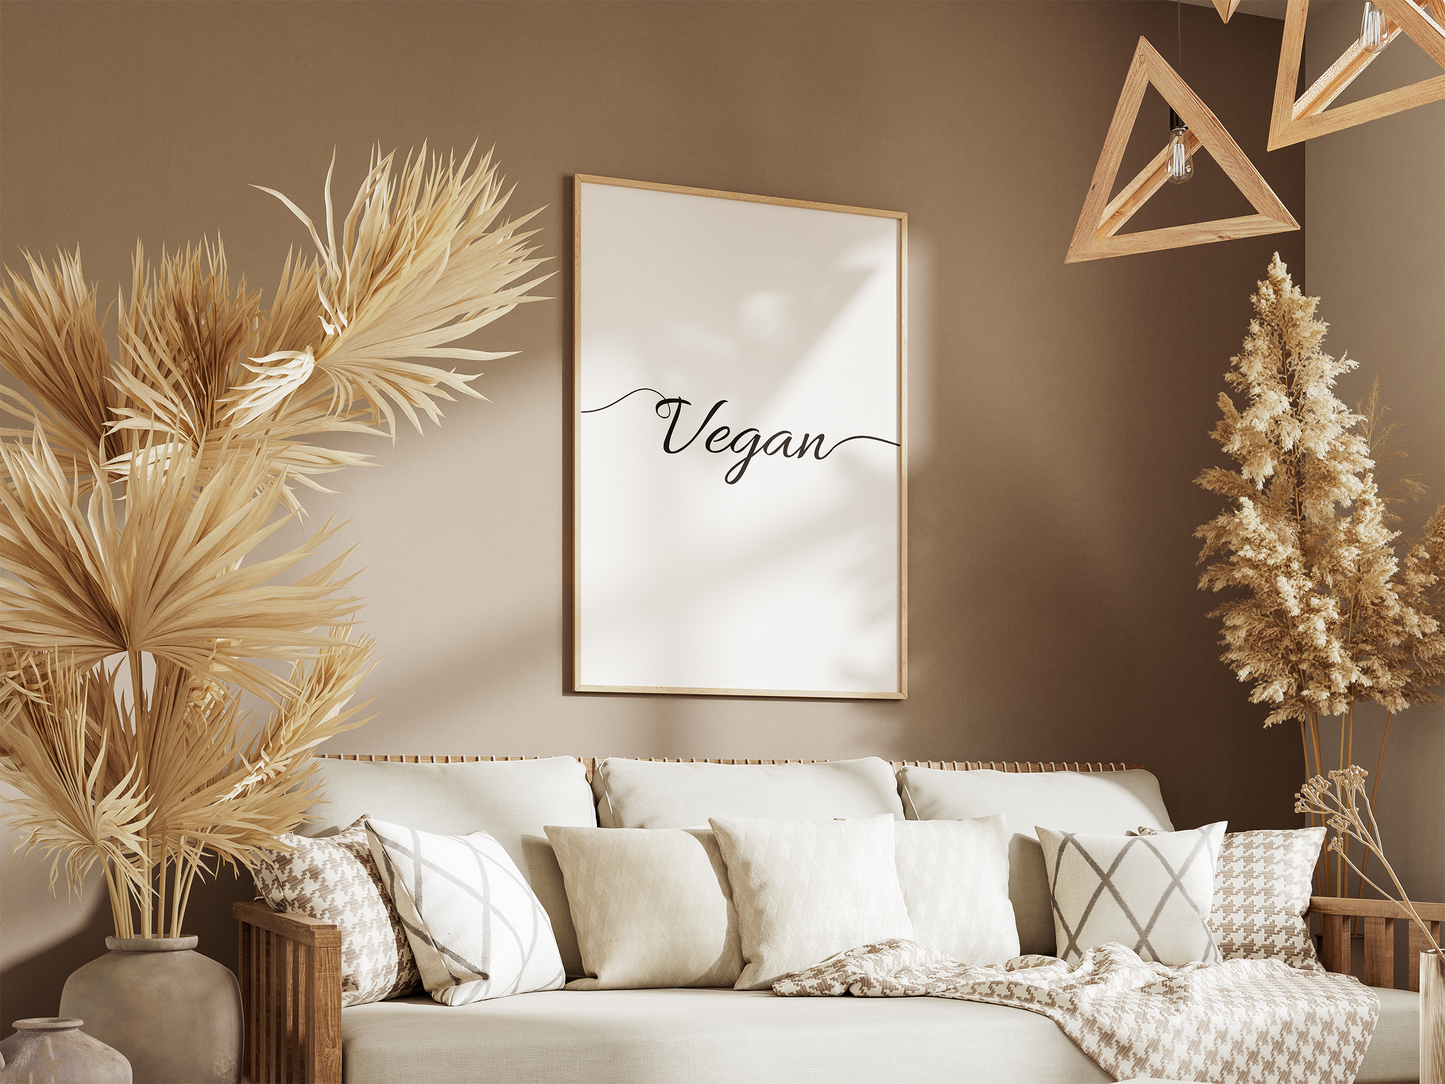 Printable digital art piece in a minimalist frame, with the word 'Vegan' in flowing cursive, complementing a cozy earth-toned living space.